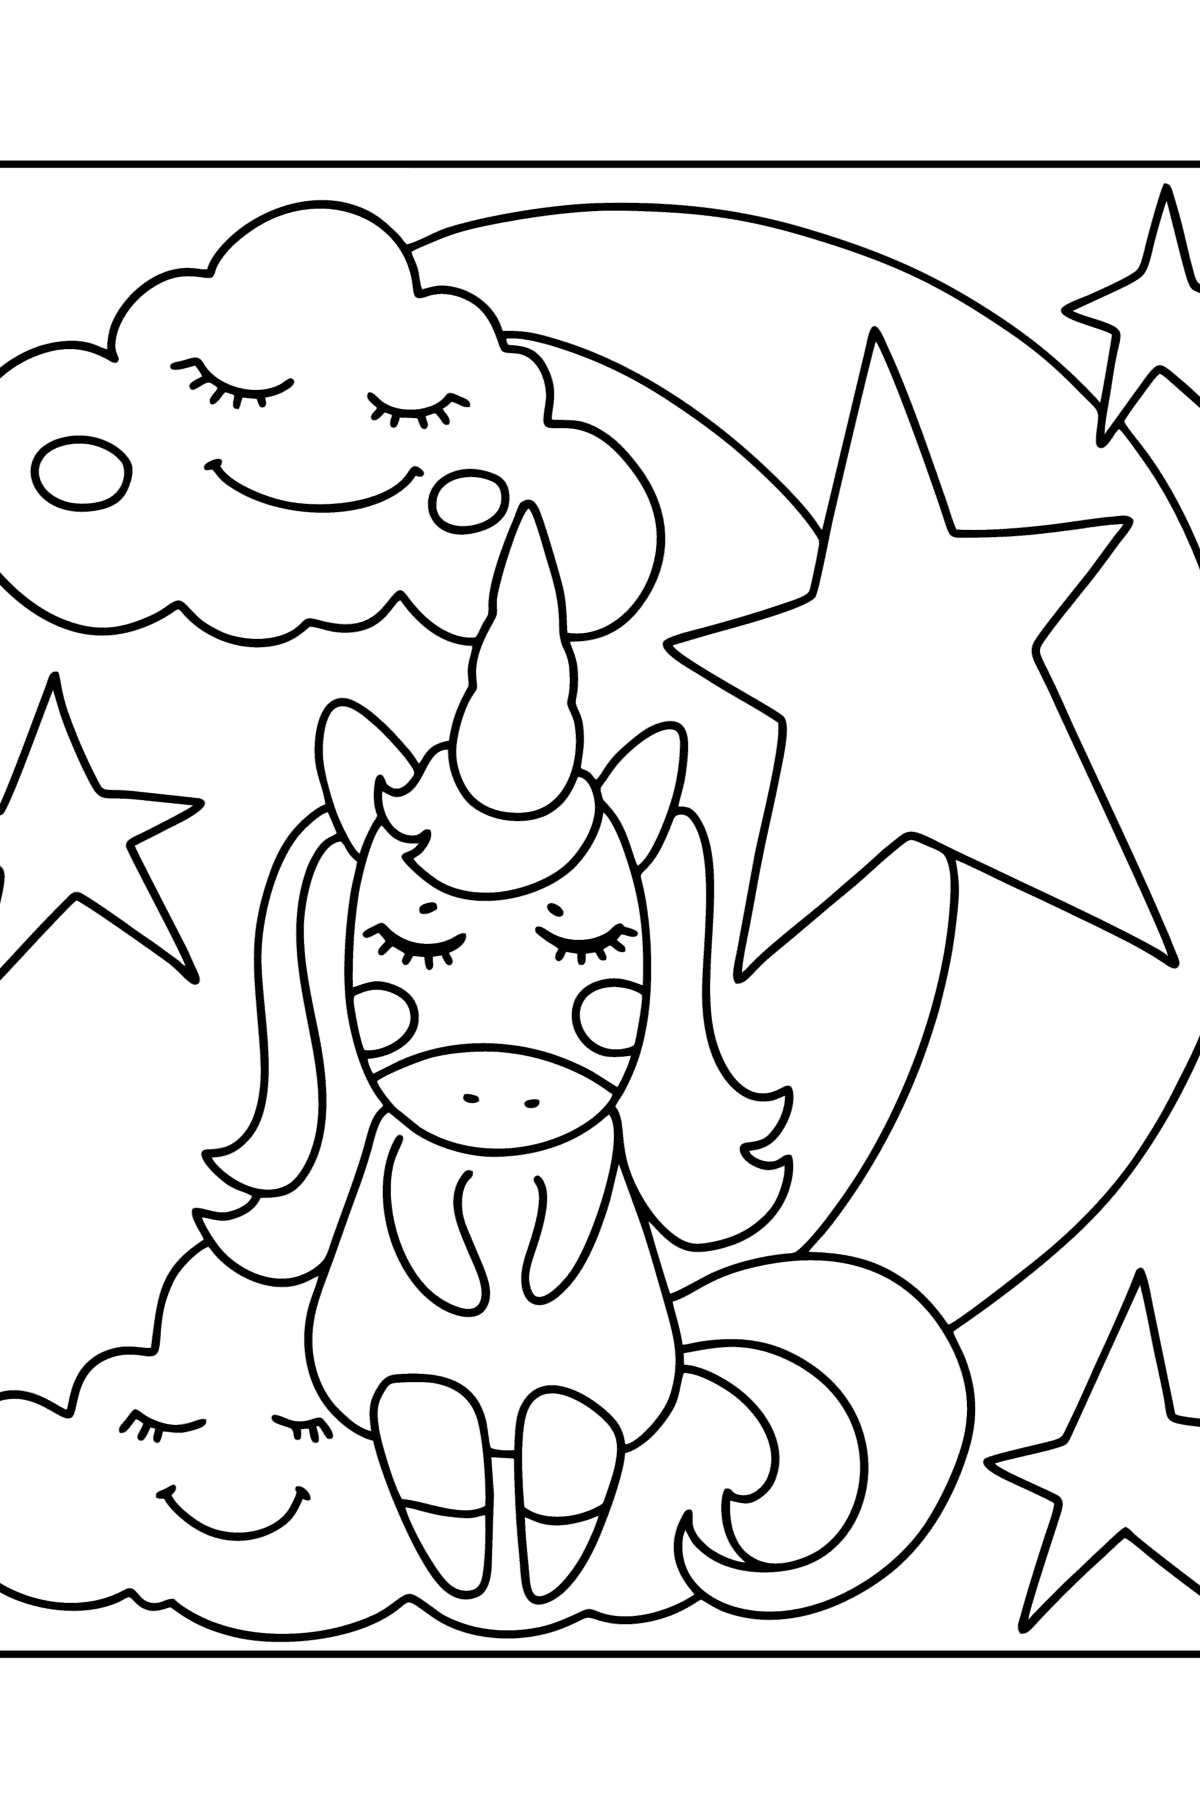 Star unicorn coloring page - Coloring Pages for Kids